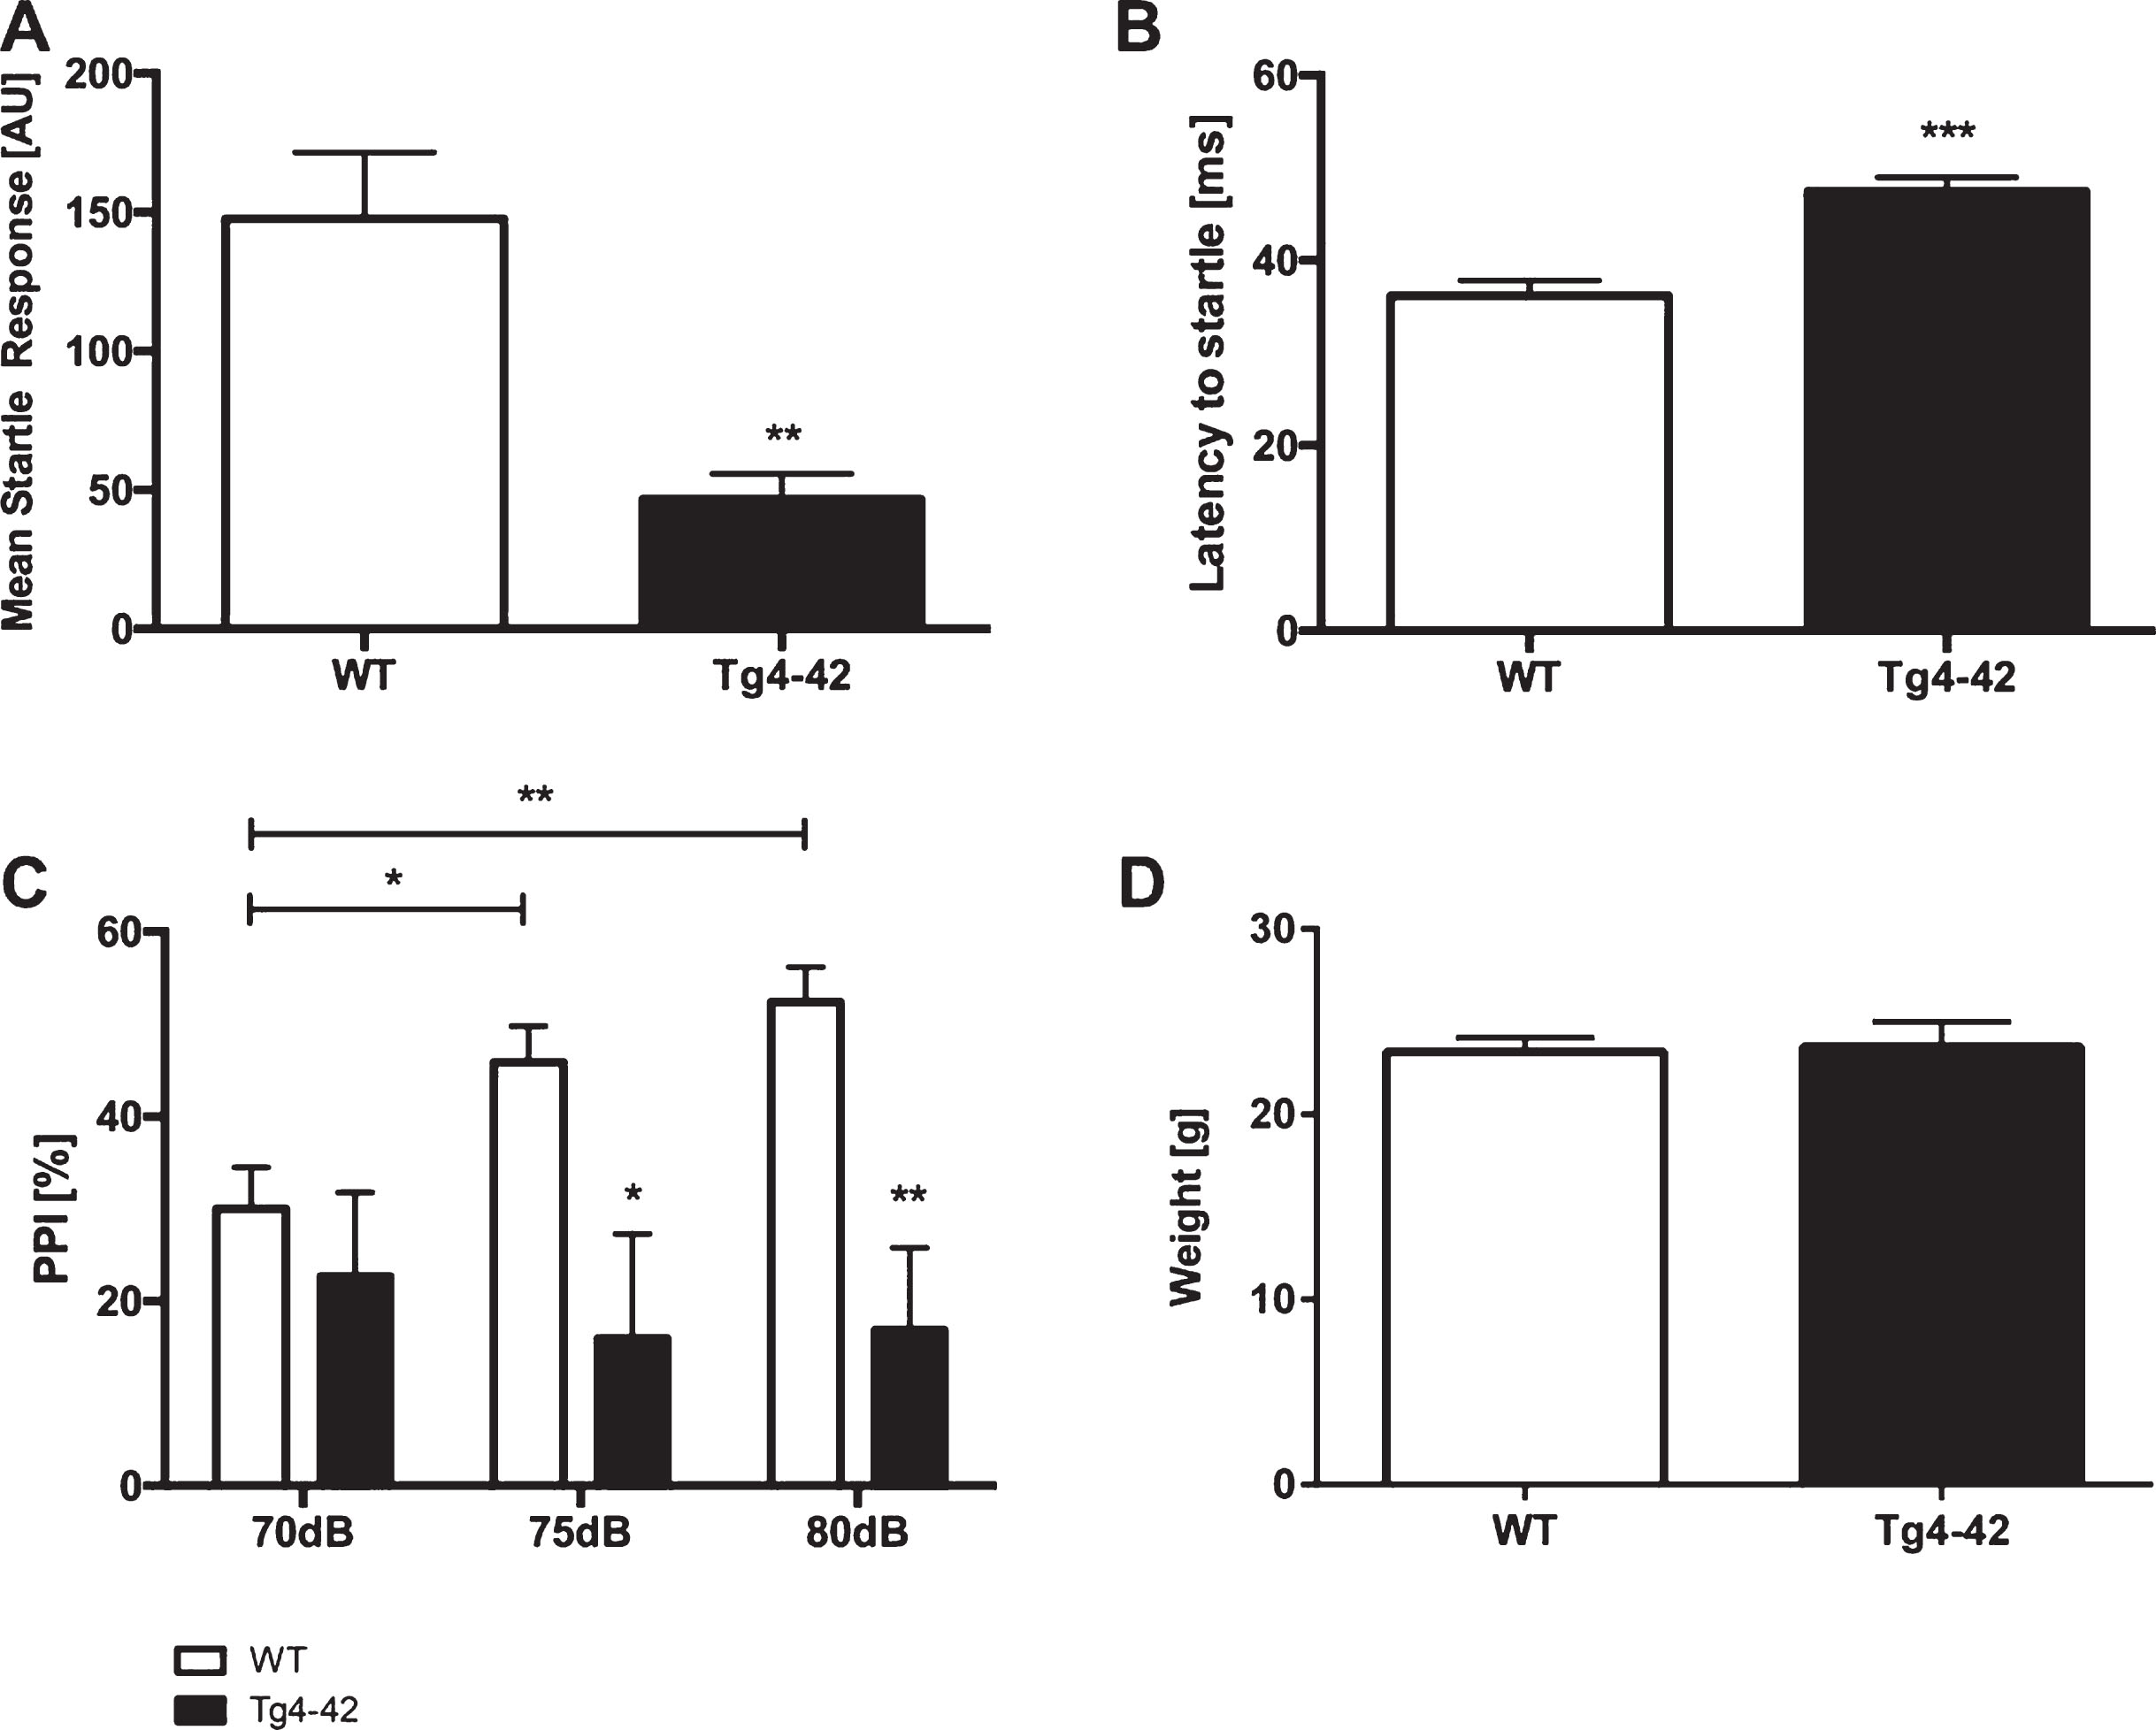 Altered acoustic startle response and prepulse inhibition in Tg4-42 mice. Tg4-42 mice showed a significantly lower acoustic startle response (A) and an increased latency to startle (B). Prepulse inhibition (PPI%) was significantly lower in Tg4-42 (n = 11) compared to WT (n = 13) mice at 70, 75, and 80 dB (C). Body weight did not differ between WT and Tg4-42 mice (D). AU = Arbitrary unit. Data presented as mean±S.E.M. A-B, D) unpaired t-test. C) Two-way analysis of variance (ANOVA) followed by Bonferroni multiple comparisons. ***p < 0.001; **p < 0.01; *p < 0.05.